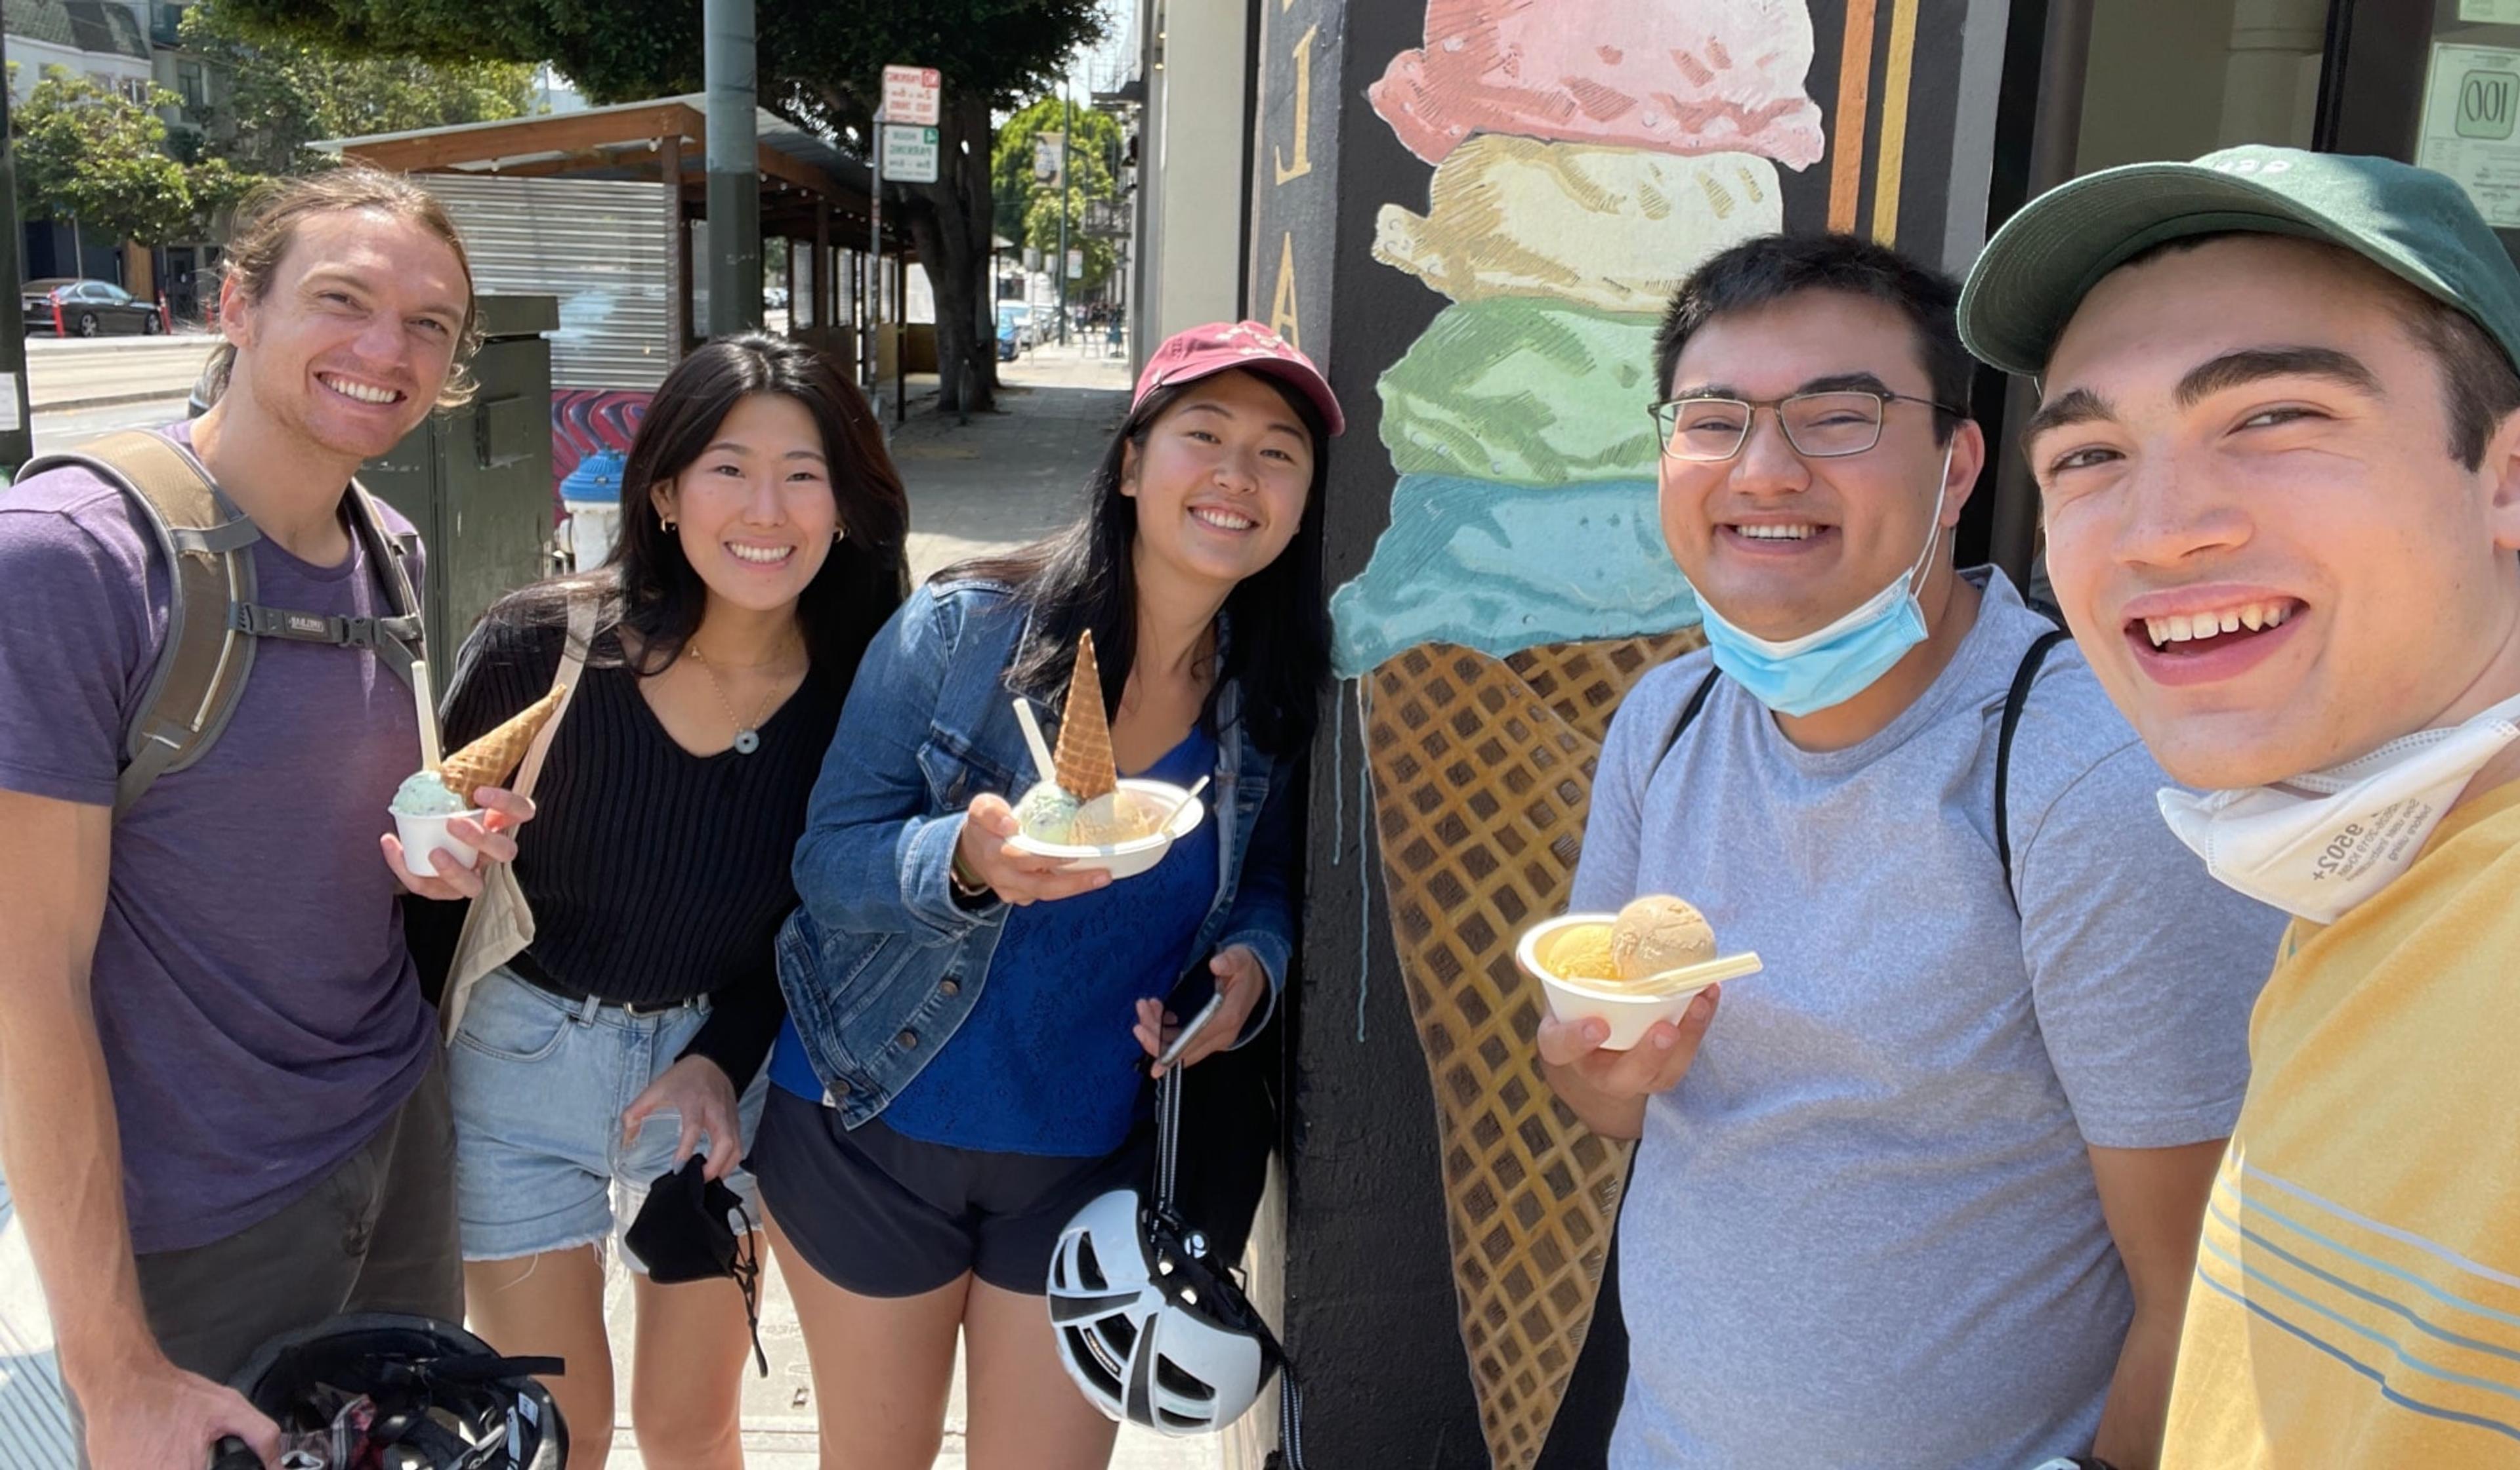 Weekend outing for ice cream in the Dogpatch